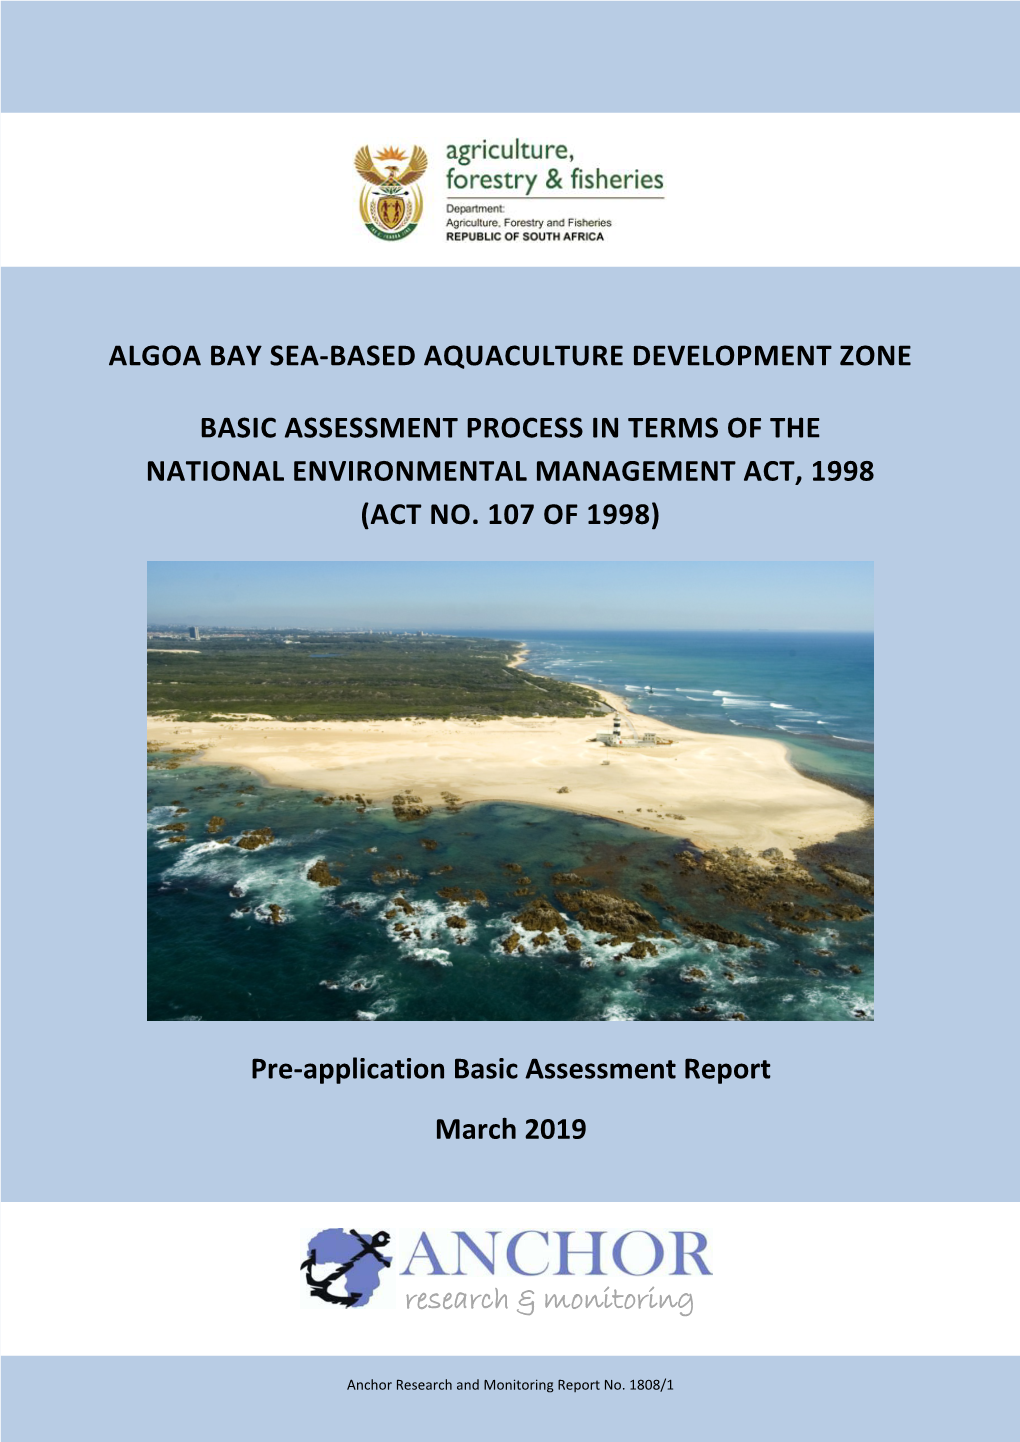 Algoa Bay Sea-Based Aquaculture Development Zone Basic Assessment Process in Terms of the National Environmental Management Act